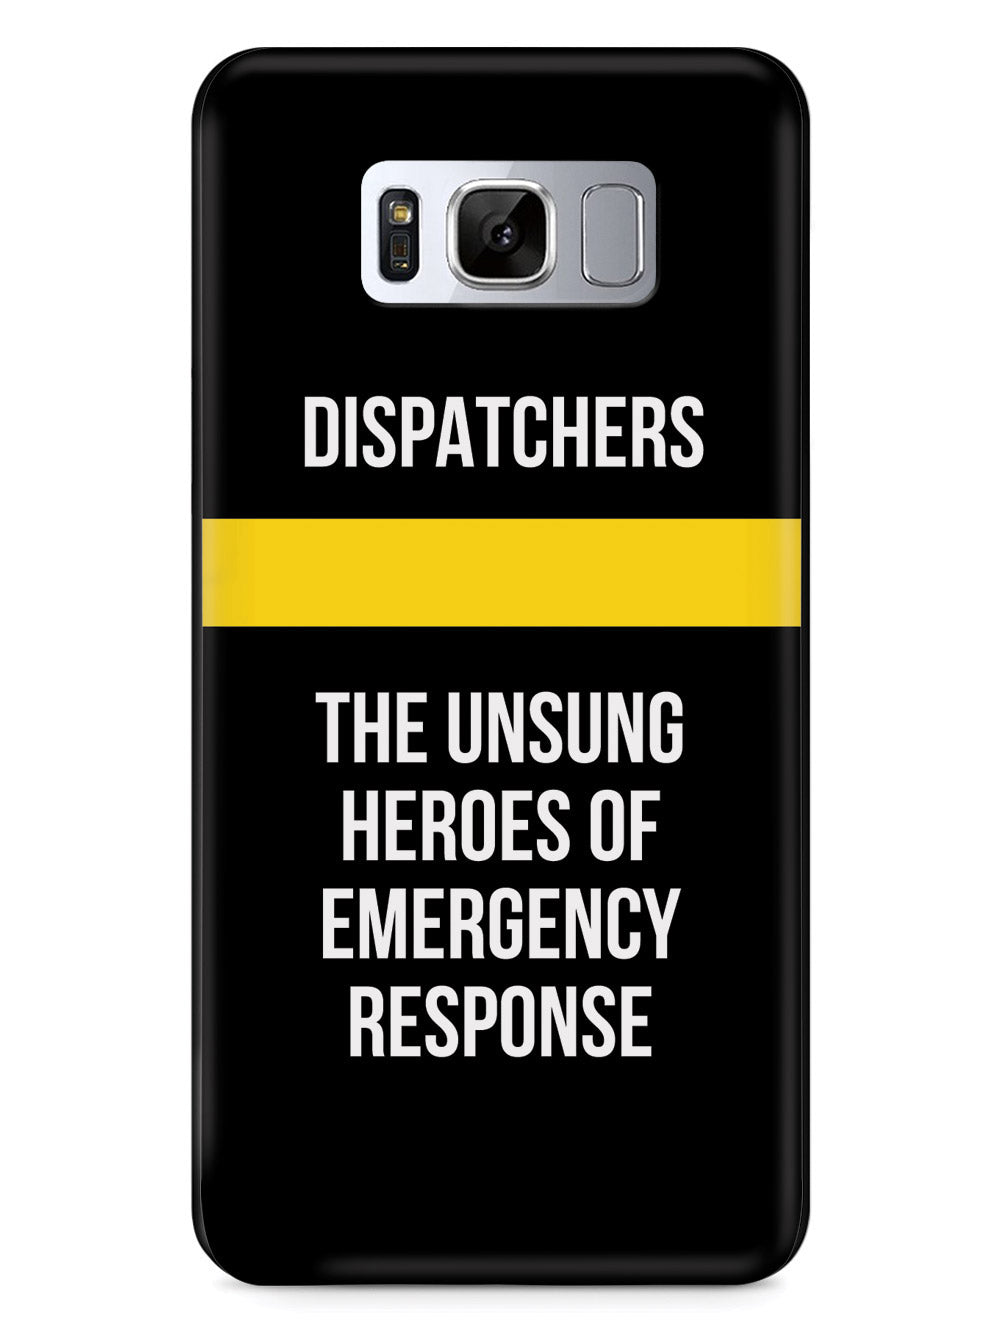 Dispatchers - The Unsung Heroes of Emergency Response  Case